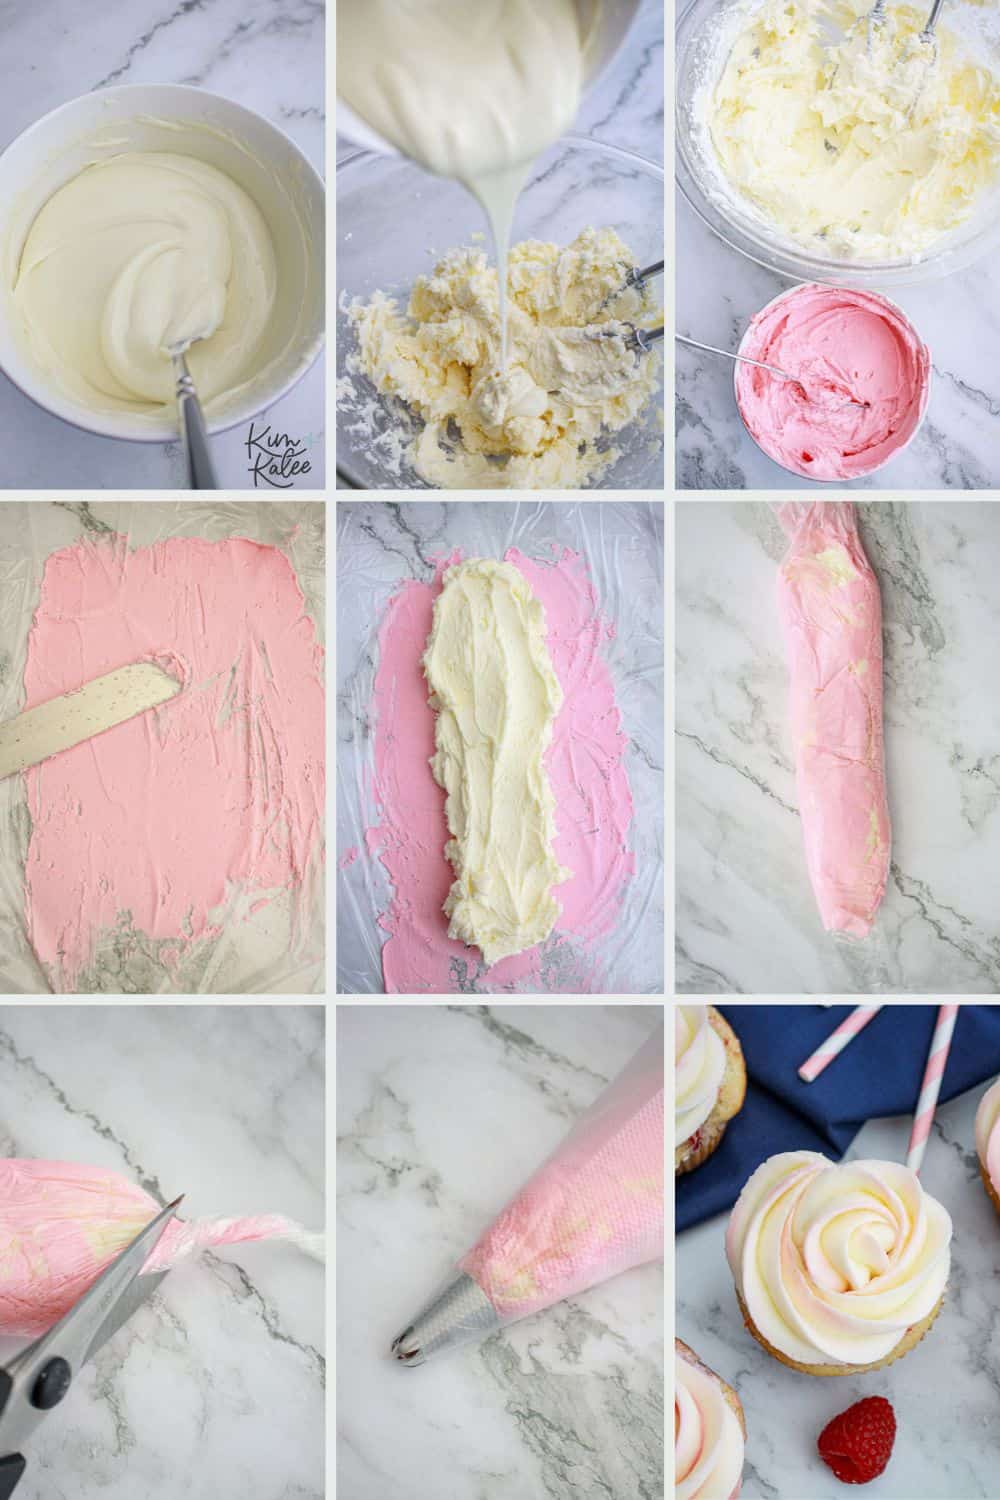 step by step how to make White Chocolate buttercream